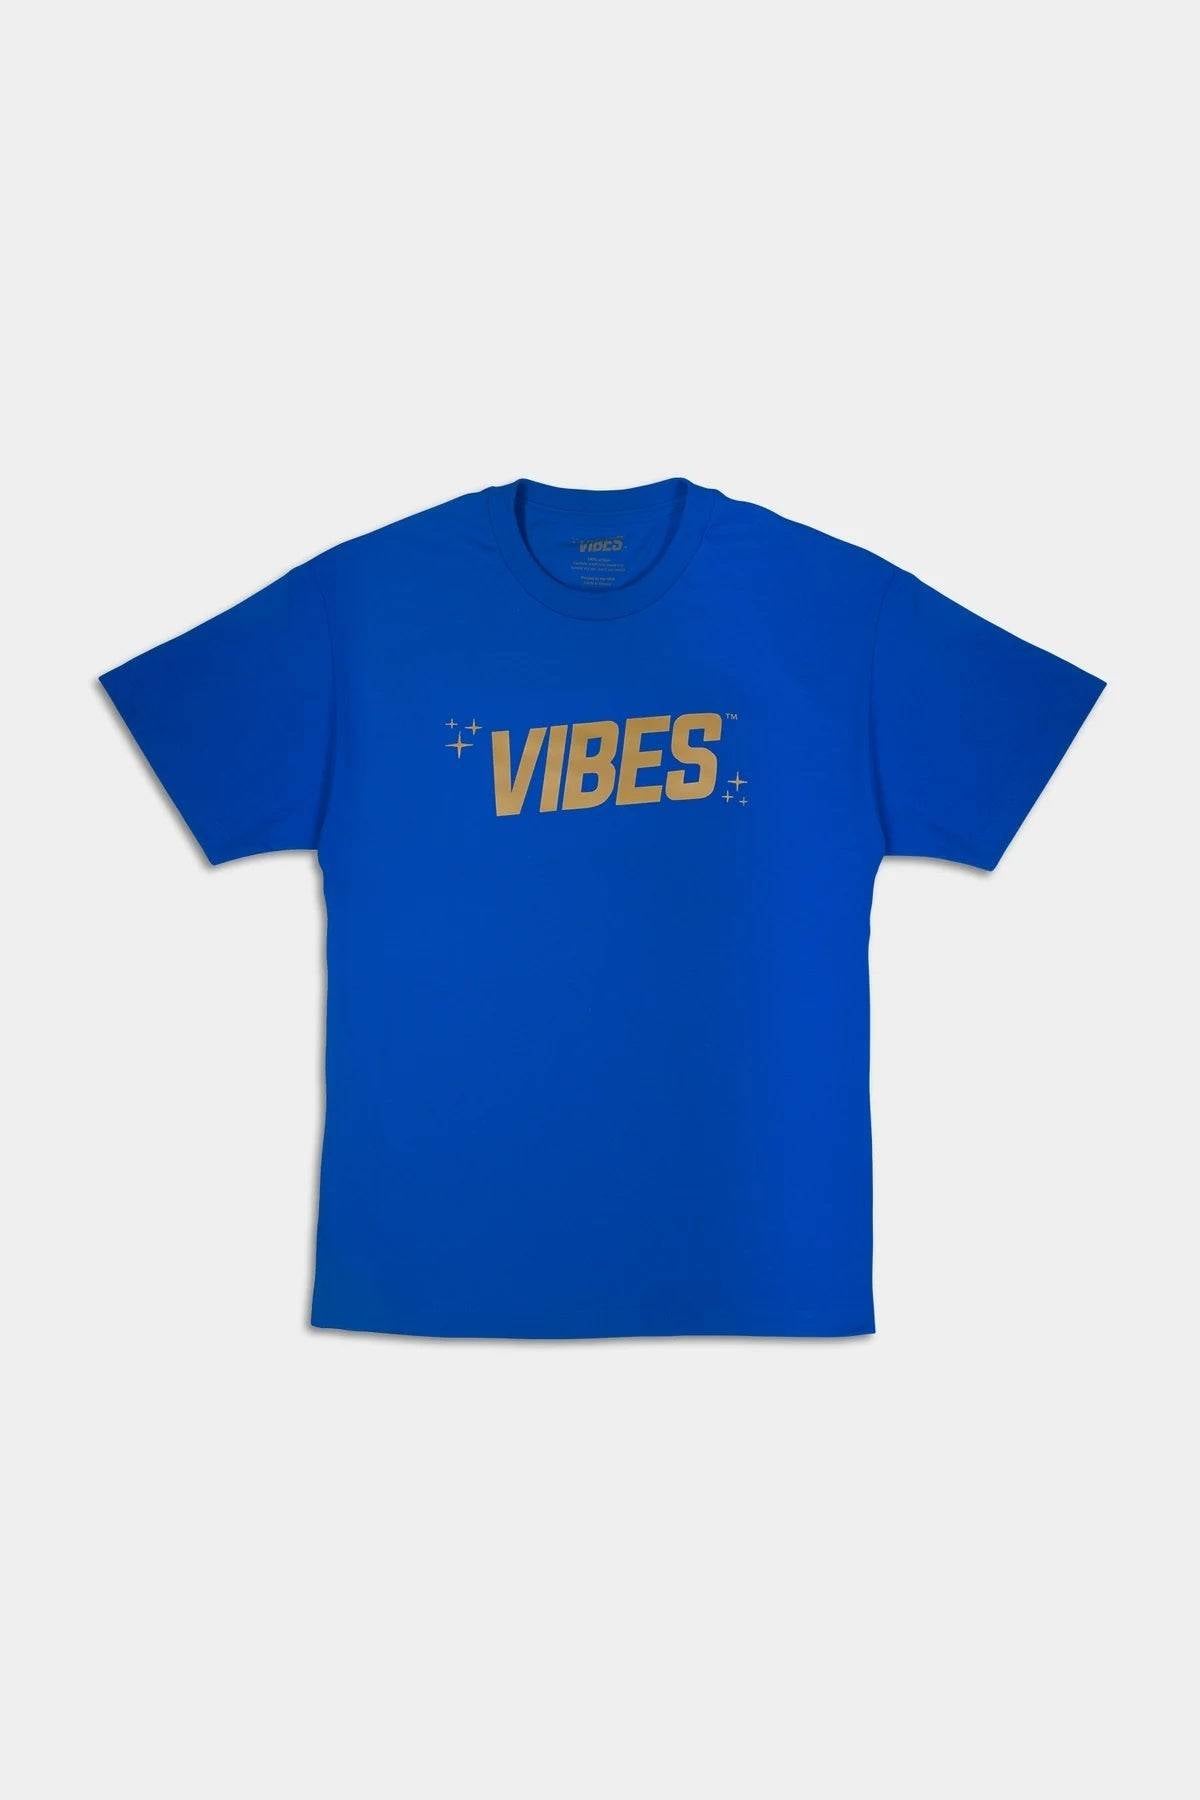 VIBES Blue With Gold Logo T-Shirt 2X-Large